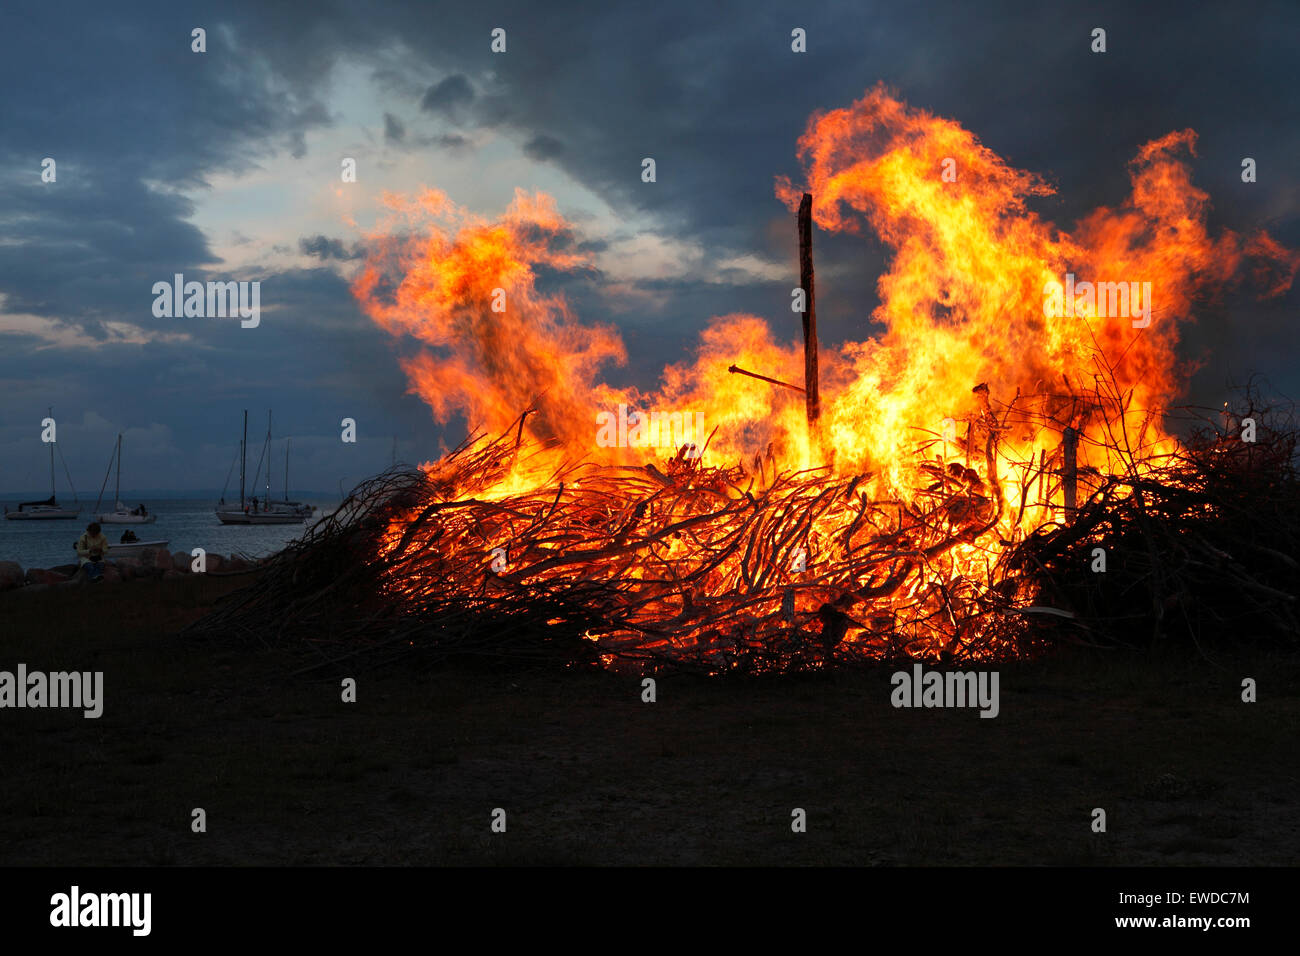 Nivaa Harbour, north of Copenhagen, Denmark. June 23, 2015. St. John's Eve, the Midsummer Eve or Sankthansaften in Denmark is celebrated by lighting bonfires at sunset. A straw and rag witch is placed on top of the bonfire before it is lit and time for the traditional speech and midsummer songs. The bonfire events including a cultural speech by a well-known person and the singing of the traditional midsummer song are held by most local authorities throughout the country. But local bonfires and celebrating parties are arranged nearly everywhere. Credit:  Niels Quist/Alamy Live News Stock Photo